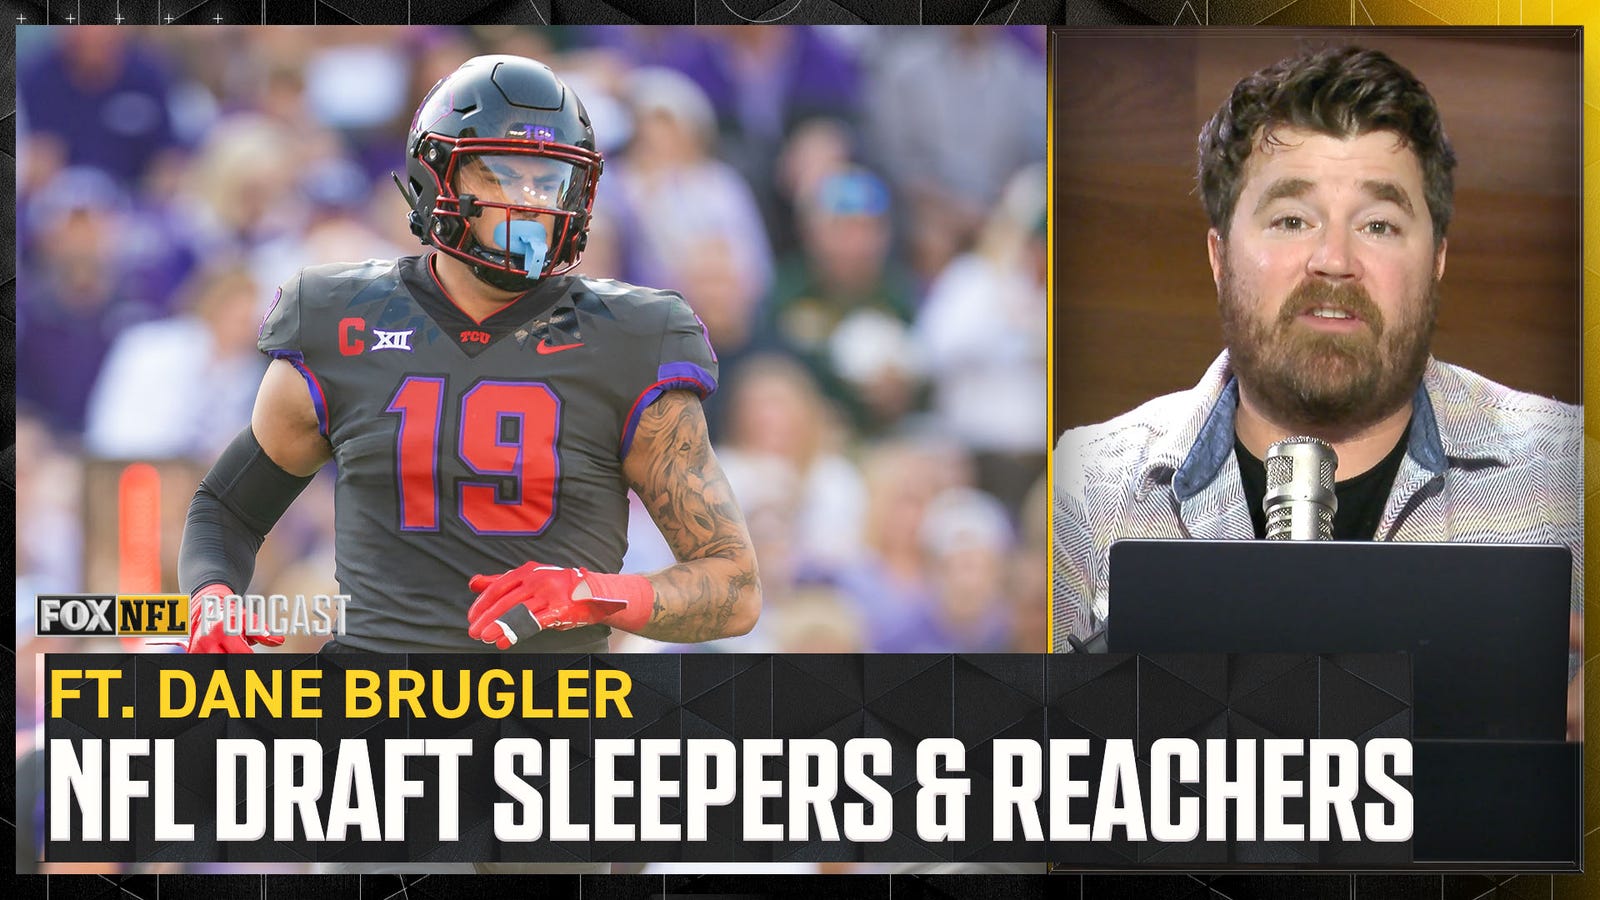 Biggest NFL Draft sleepers and reachers to watch for